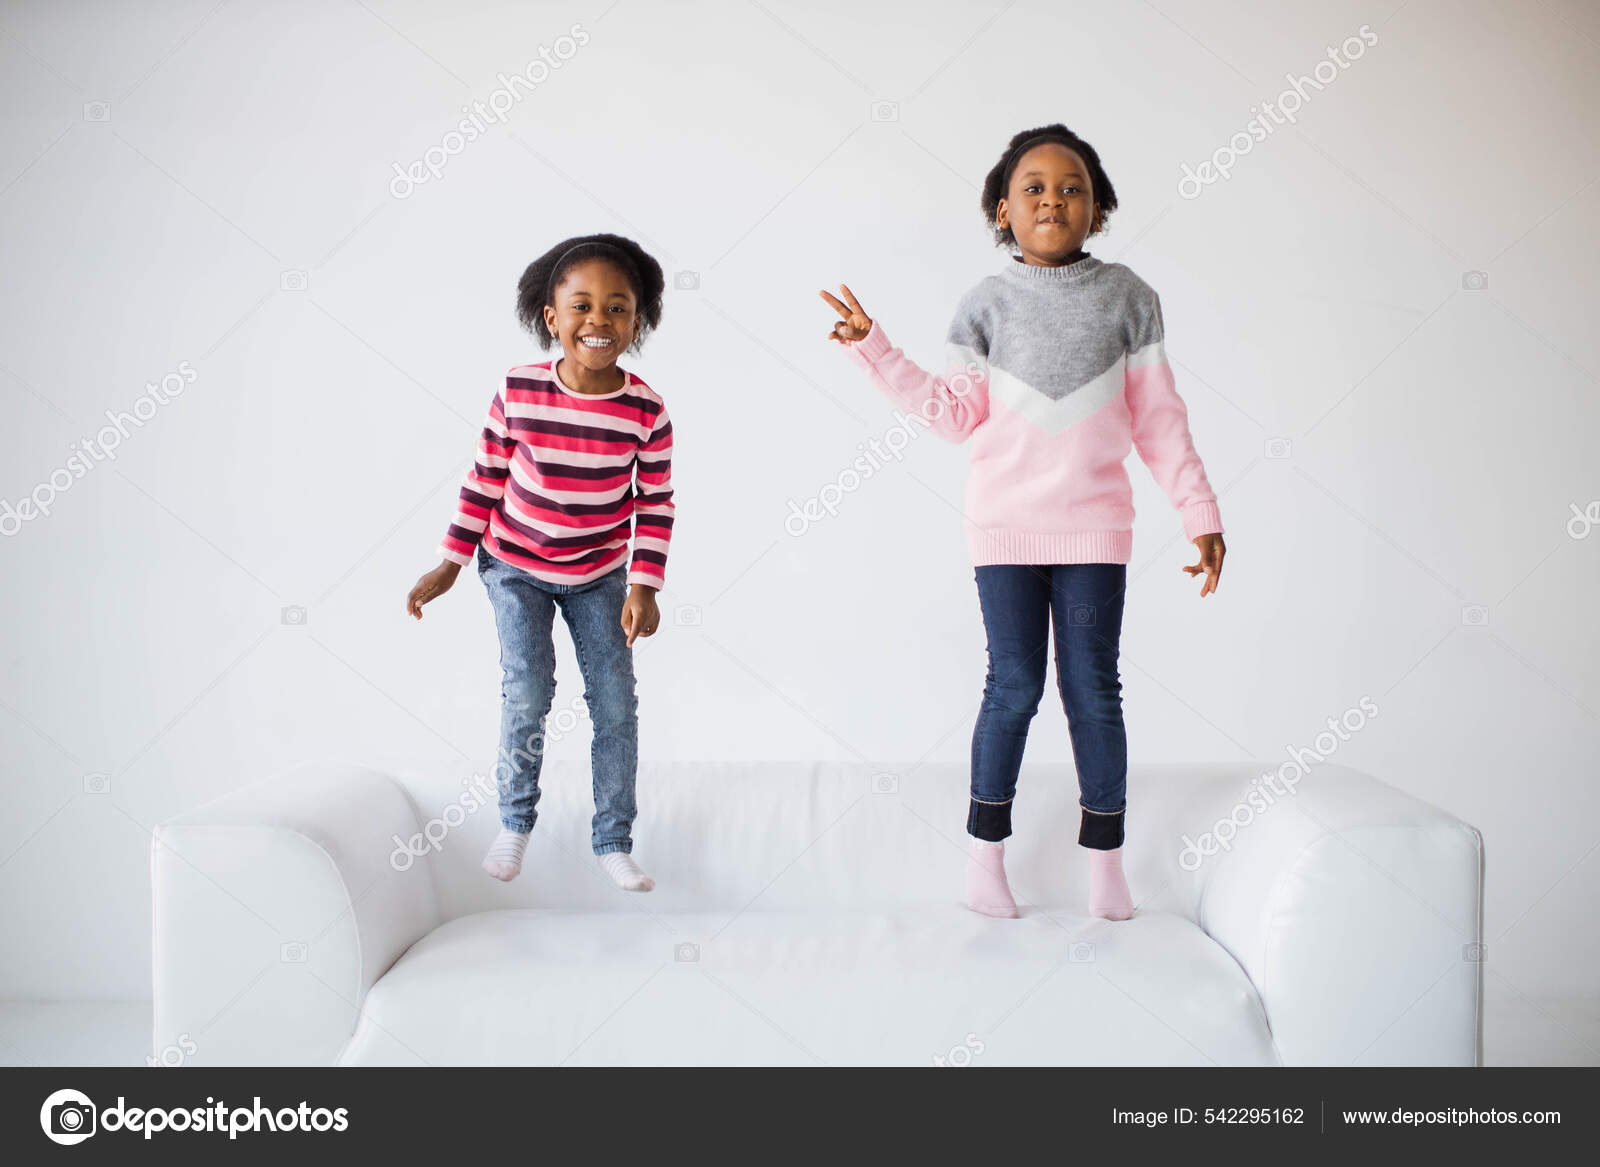 children laughing together